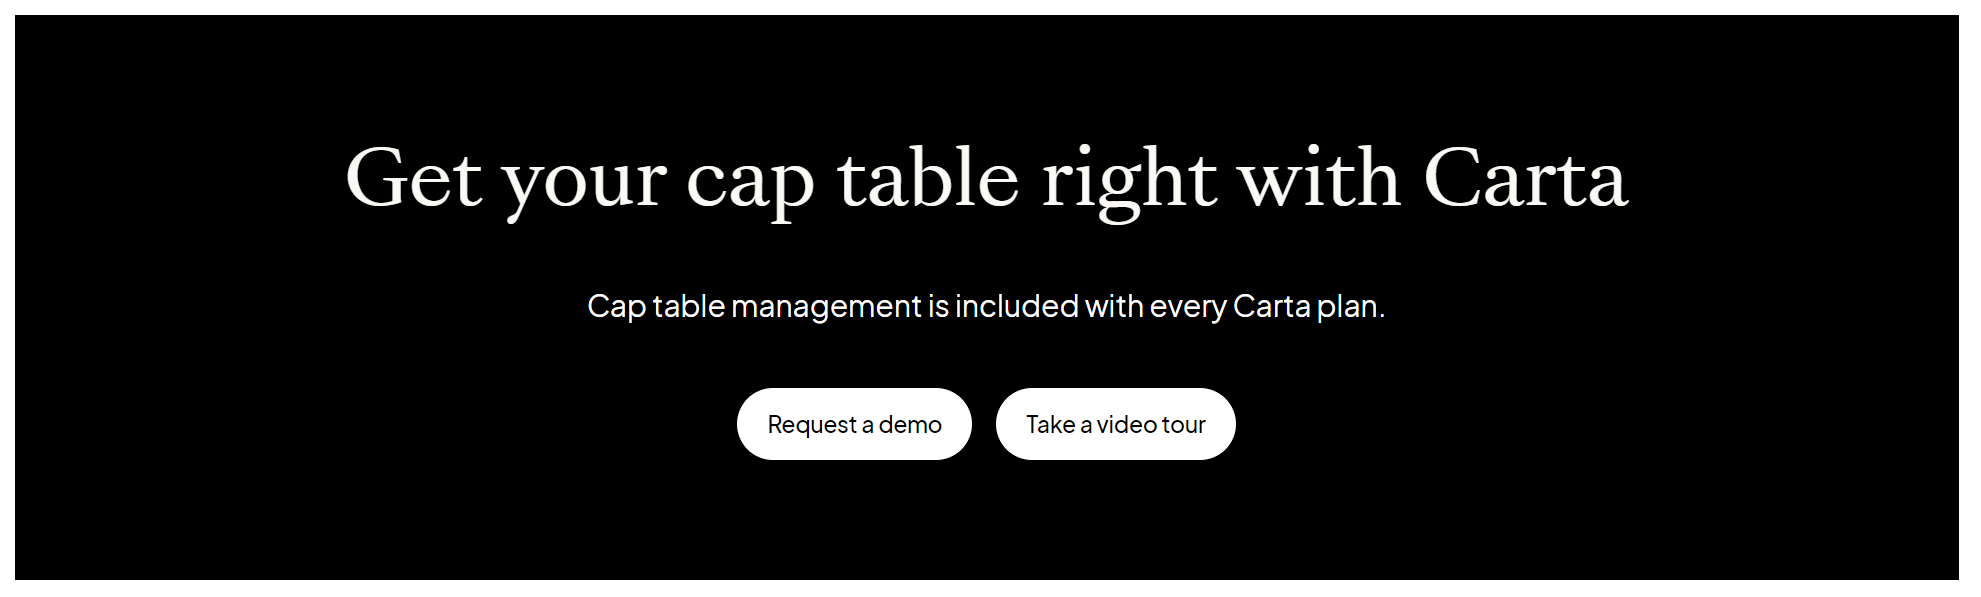 Carta uses simple, direct copy to move visitors from its cap table management page to a demo request